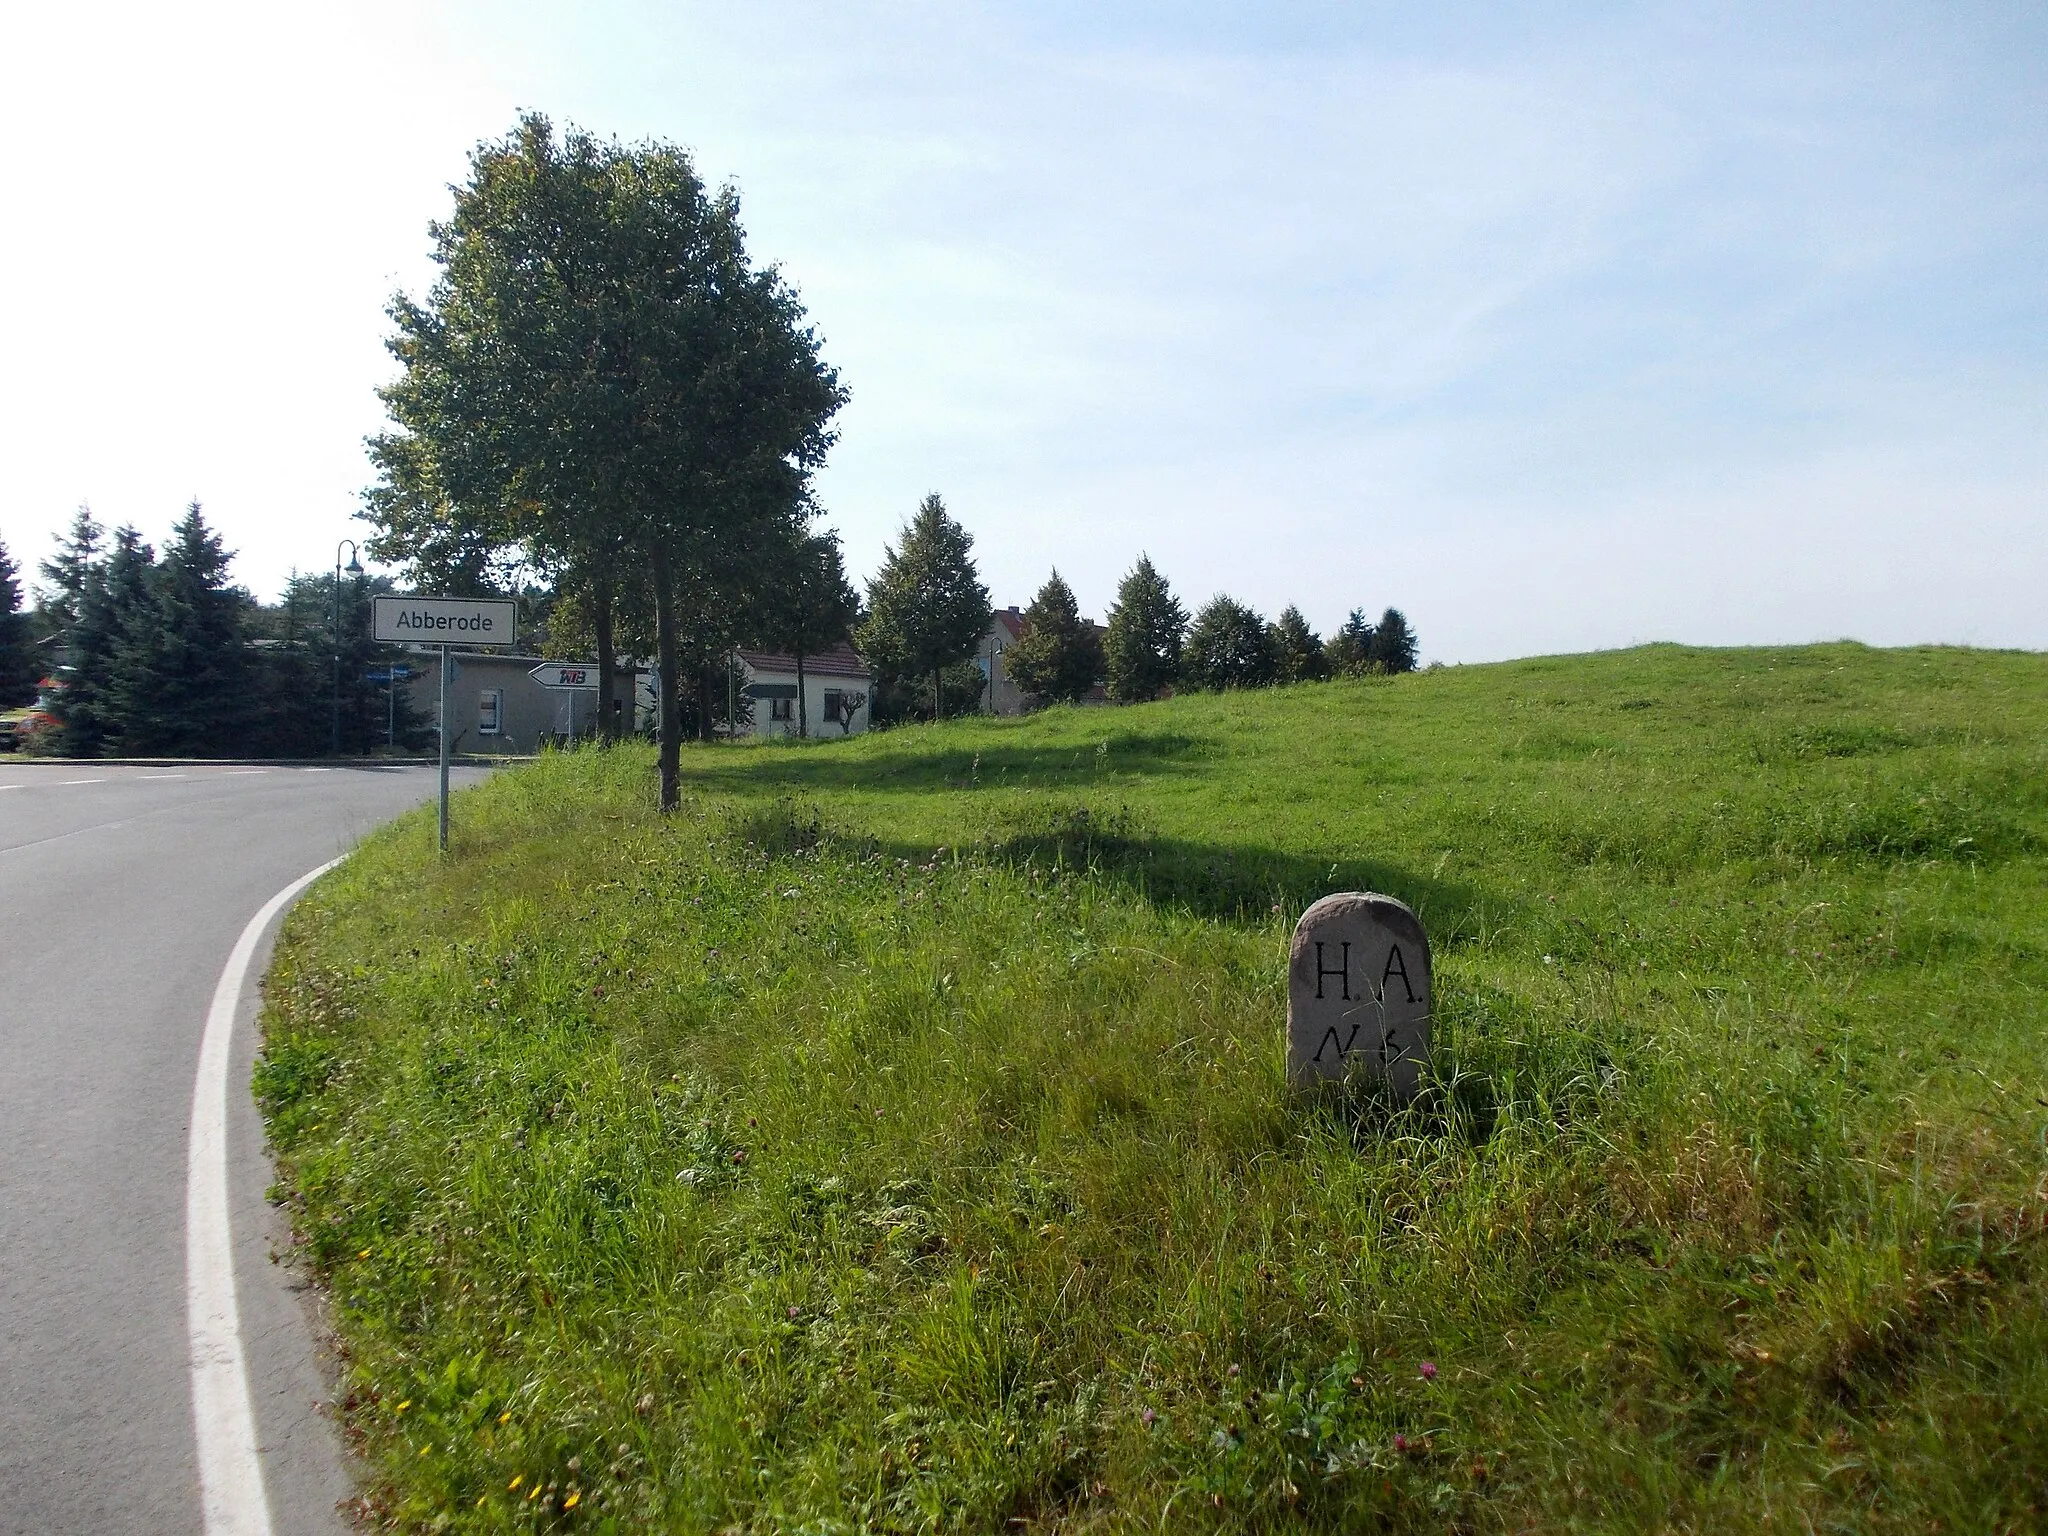 Photo showing: Boundary stone on the former border between Prussia and Anhalt, between the villages of Abberode and Tilkerode (Mansfeld, Mansfeld-Südharz district, Saxony-Anhalt)